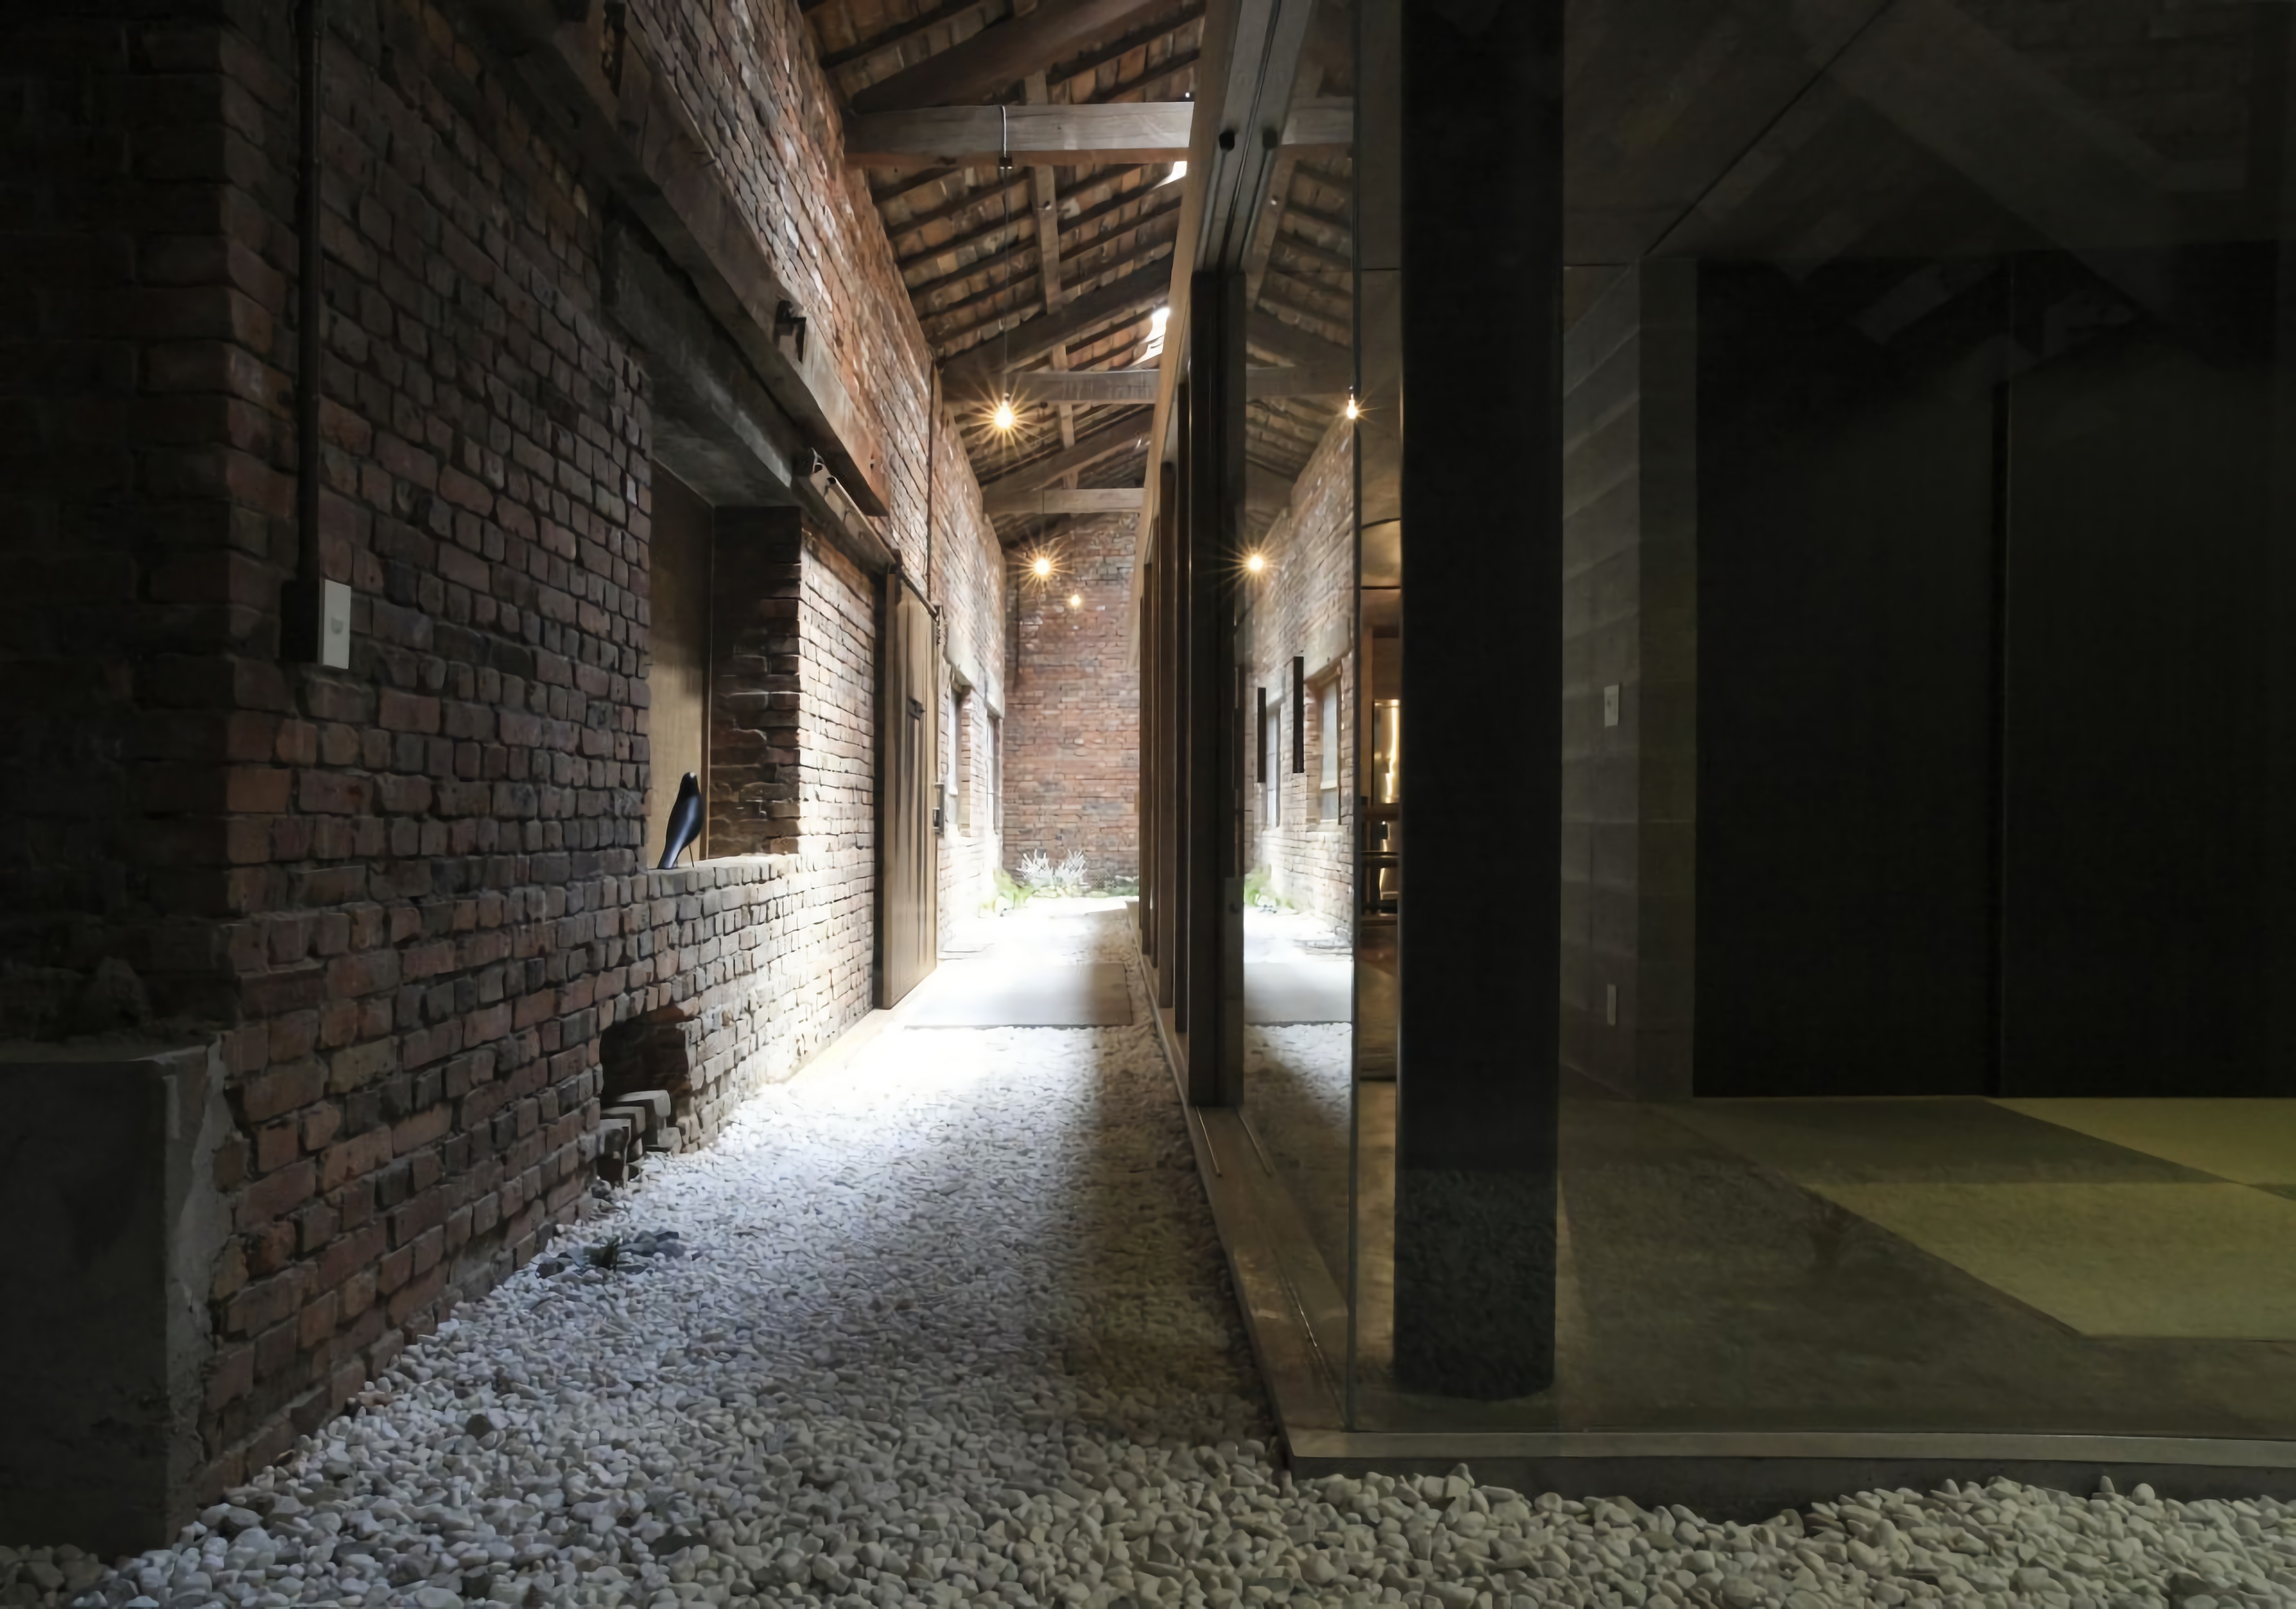 The Charm of an Old Warehouse Side by Side with a Modern New Volume